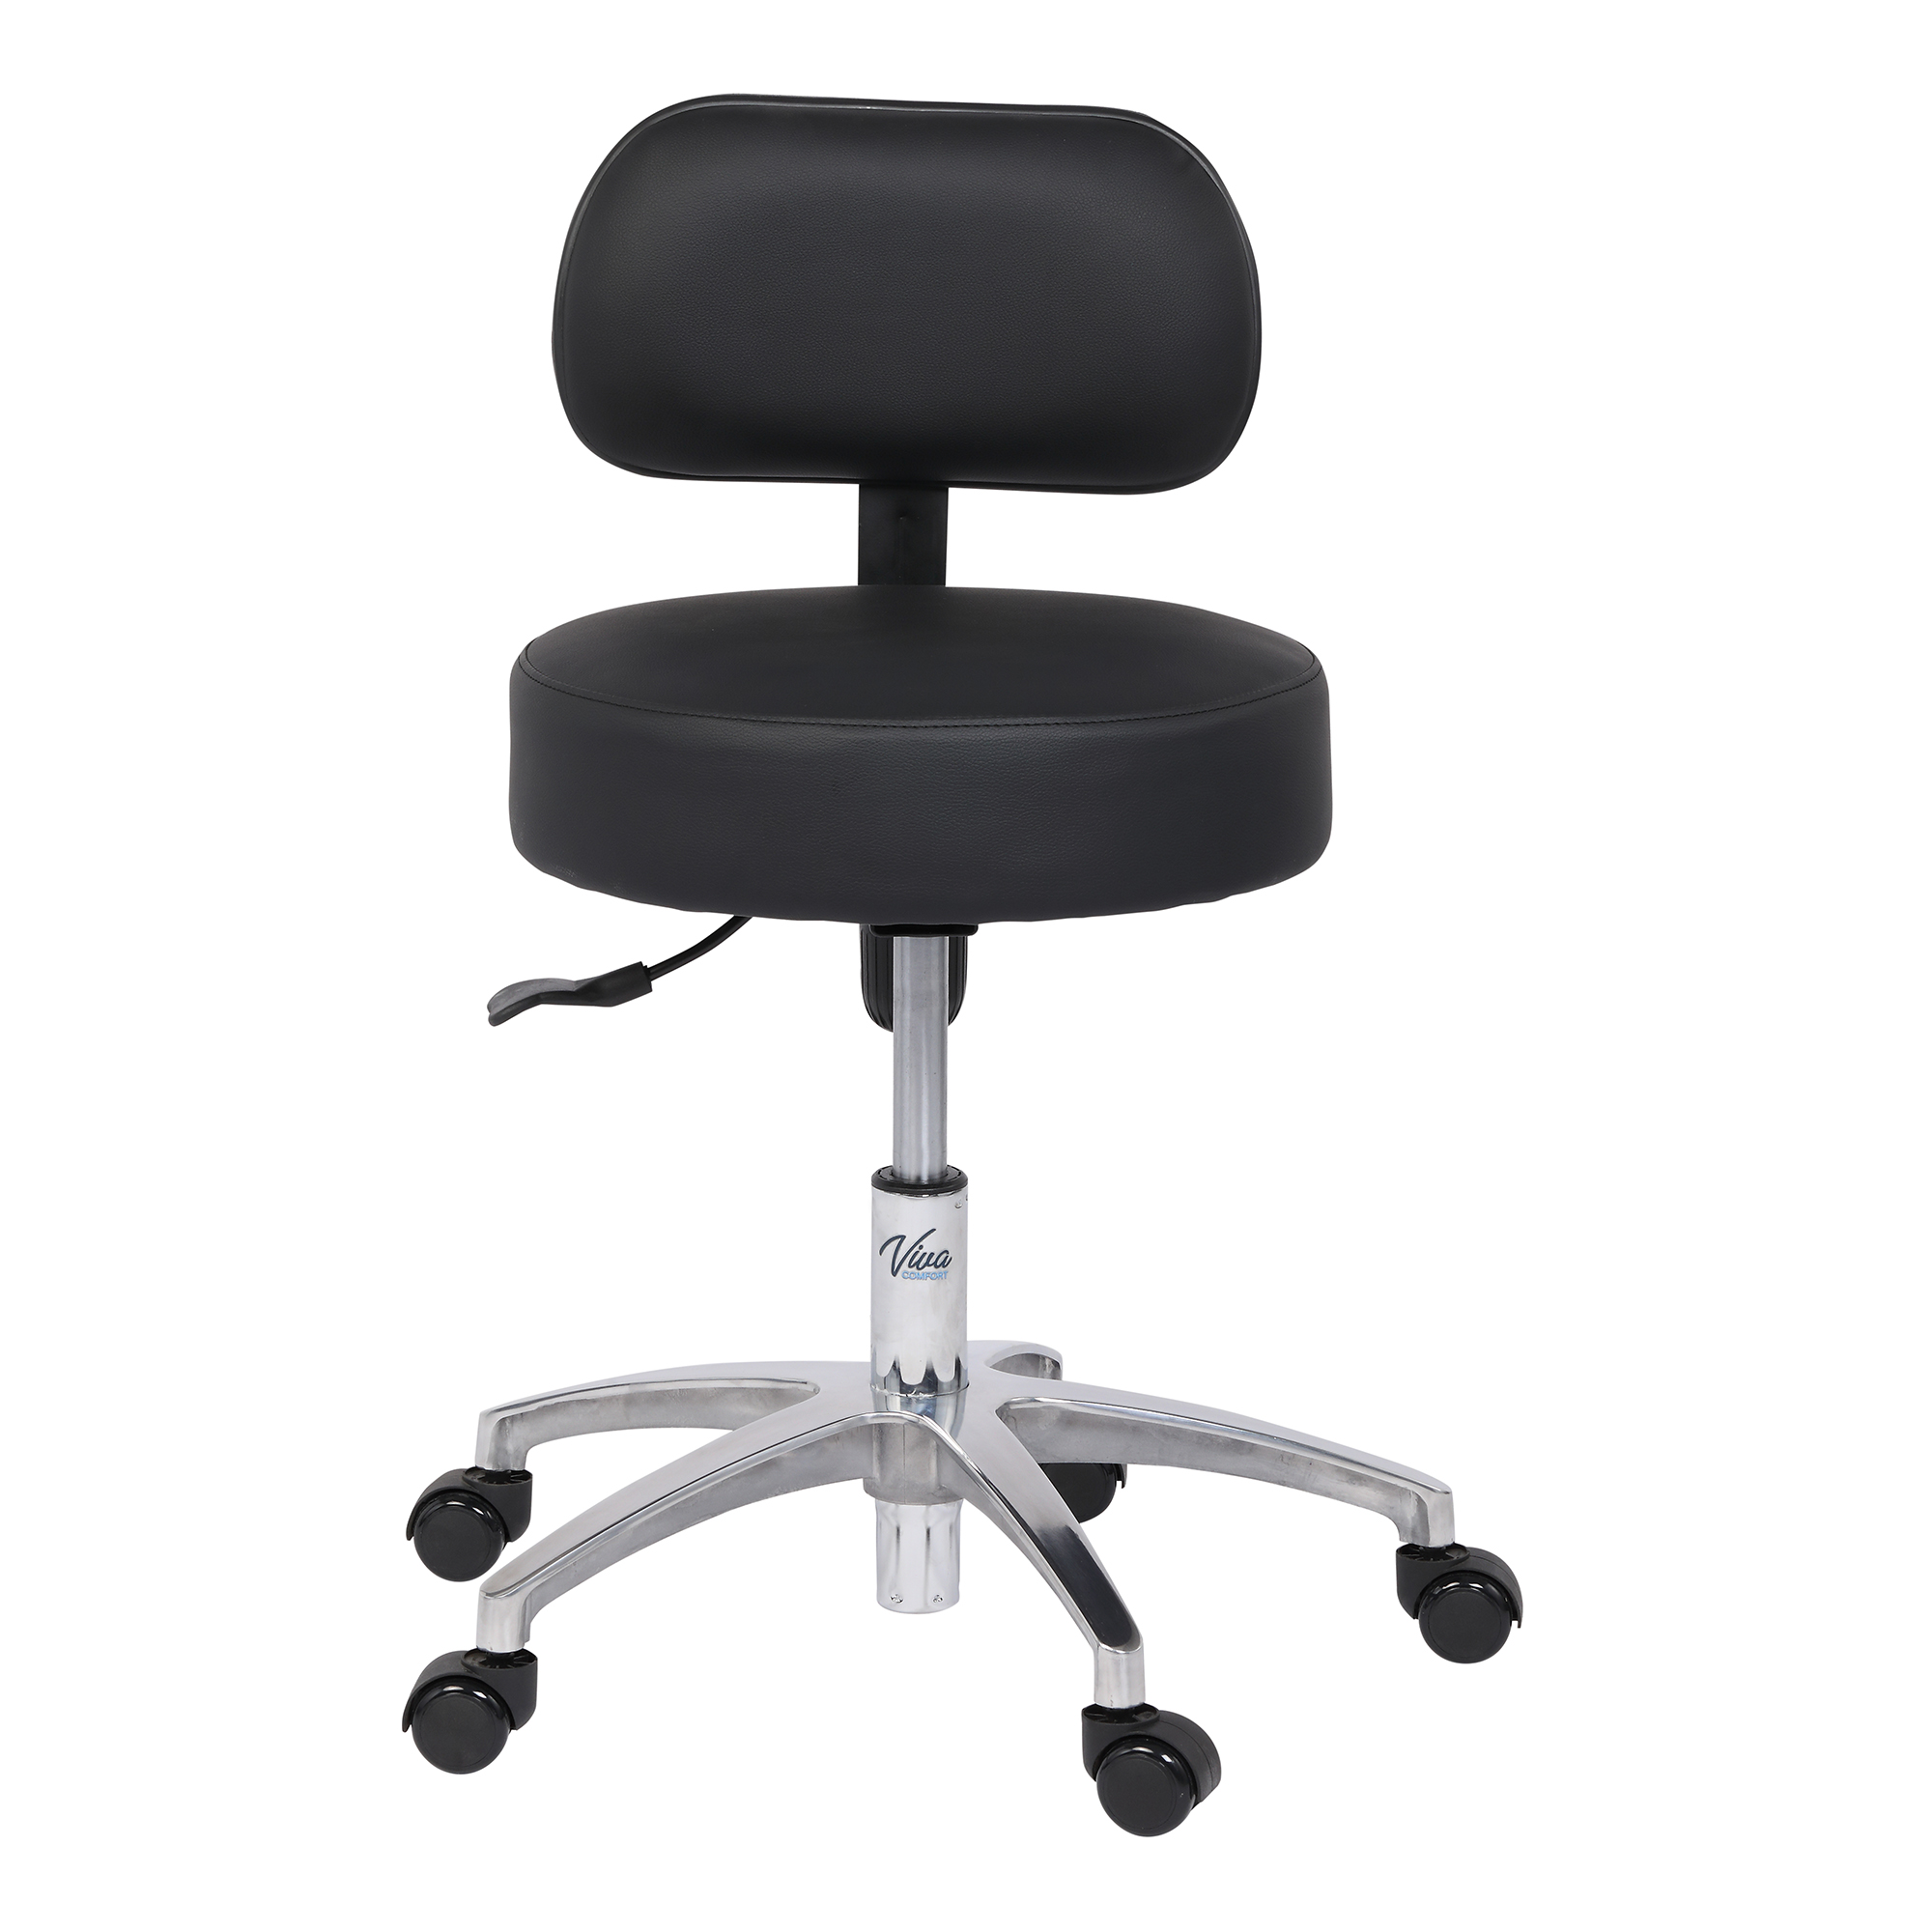 Pneumatic Height Adjustable Exam Stool with Backrest